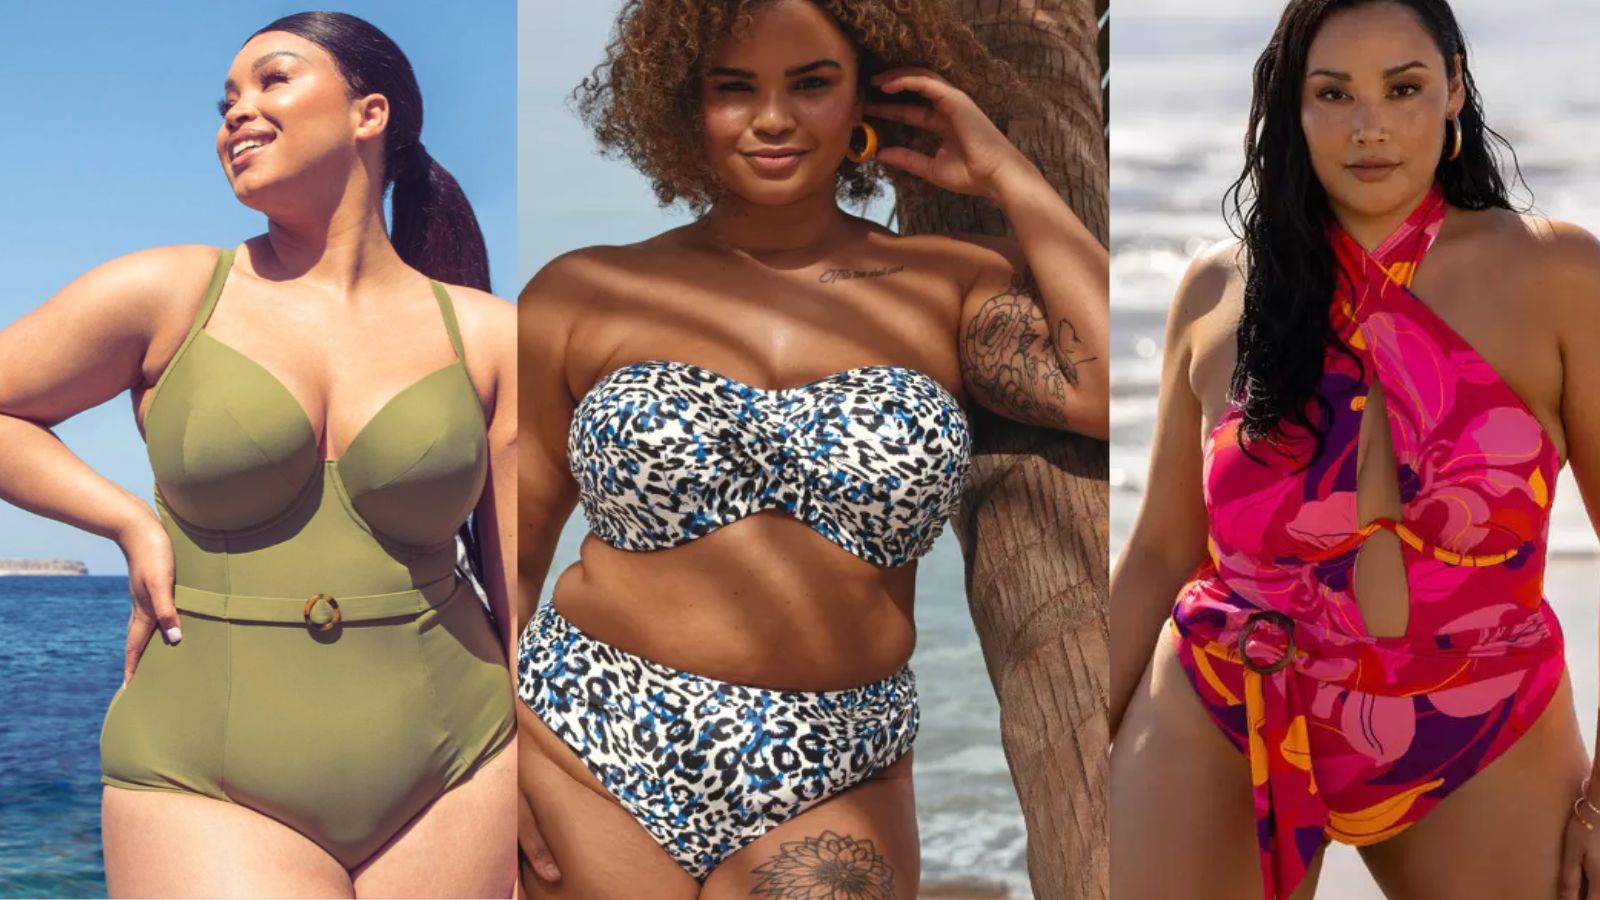 Best swimsuits for large busts to offer support all summer